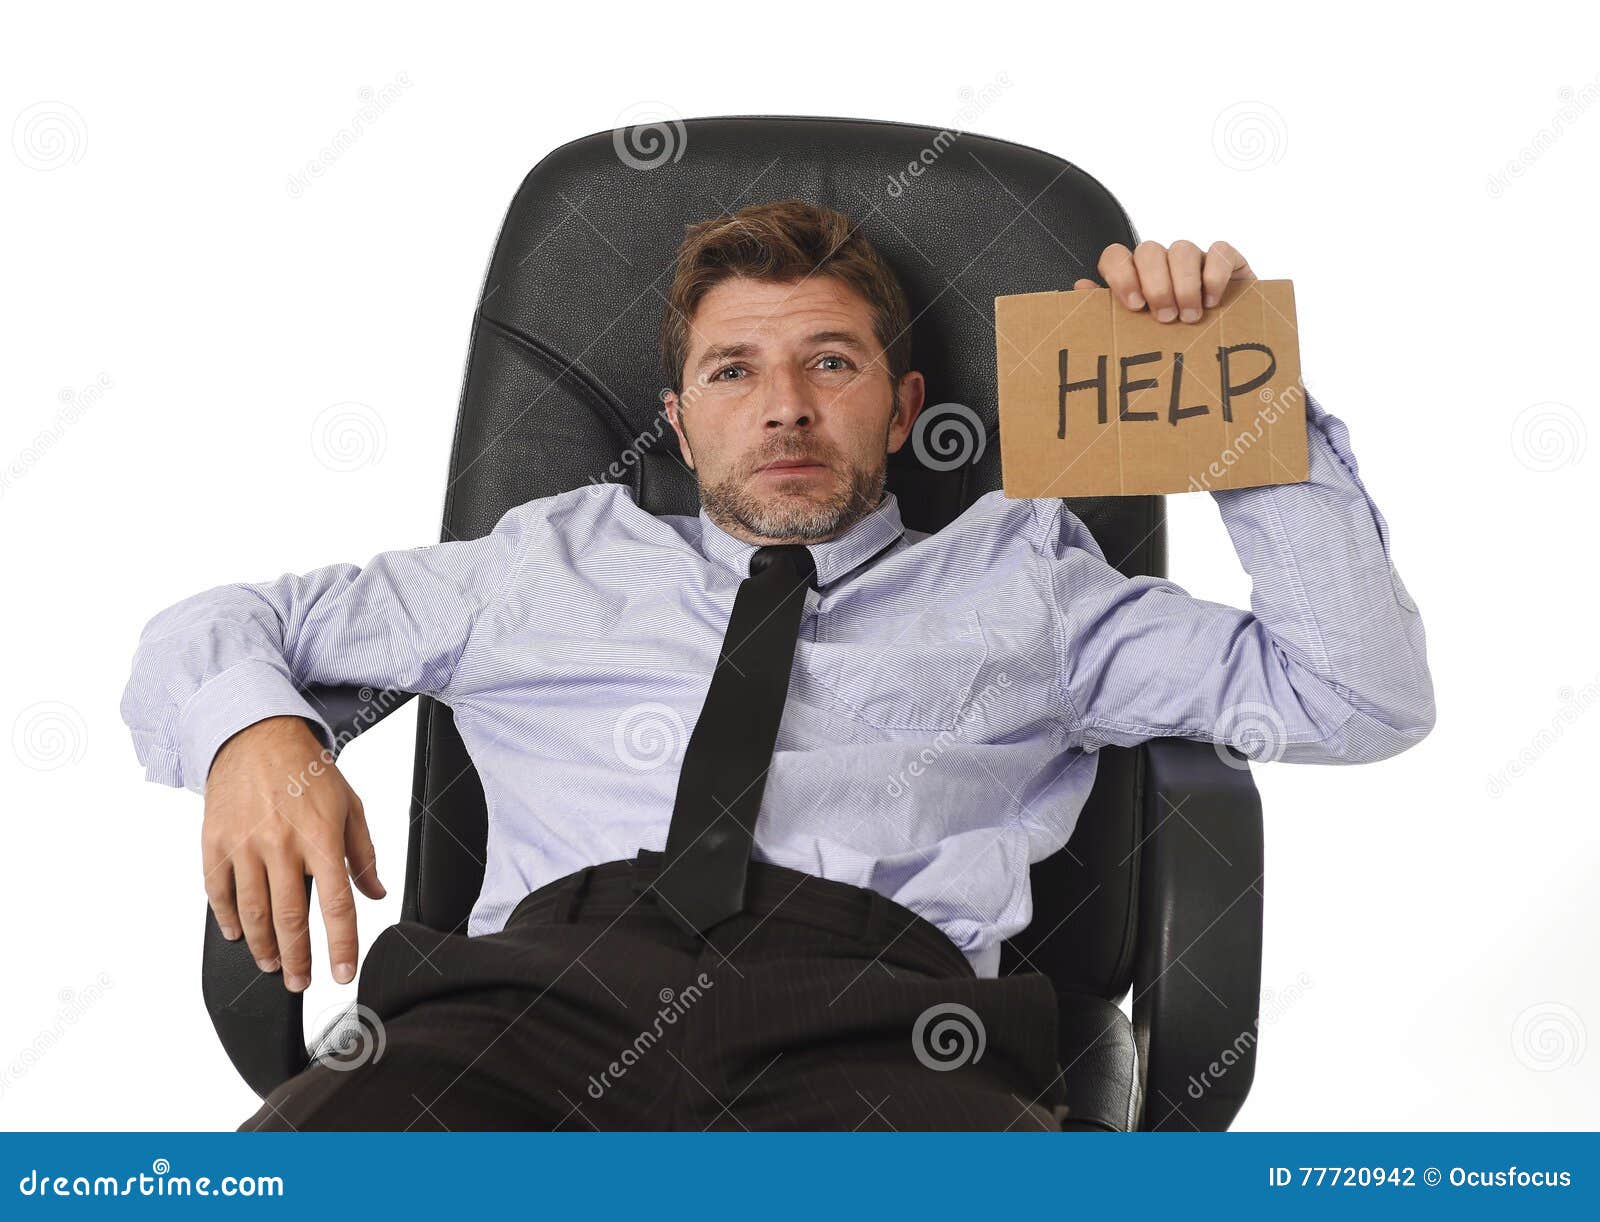 young attractive tired and wasted businessman sitting on office chair asking for help in stress